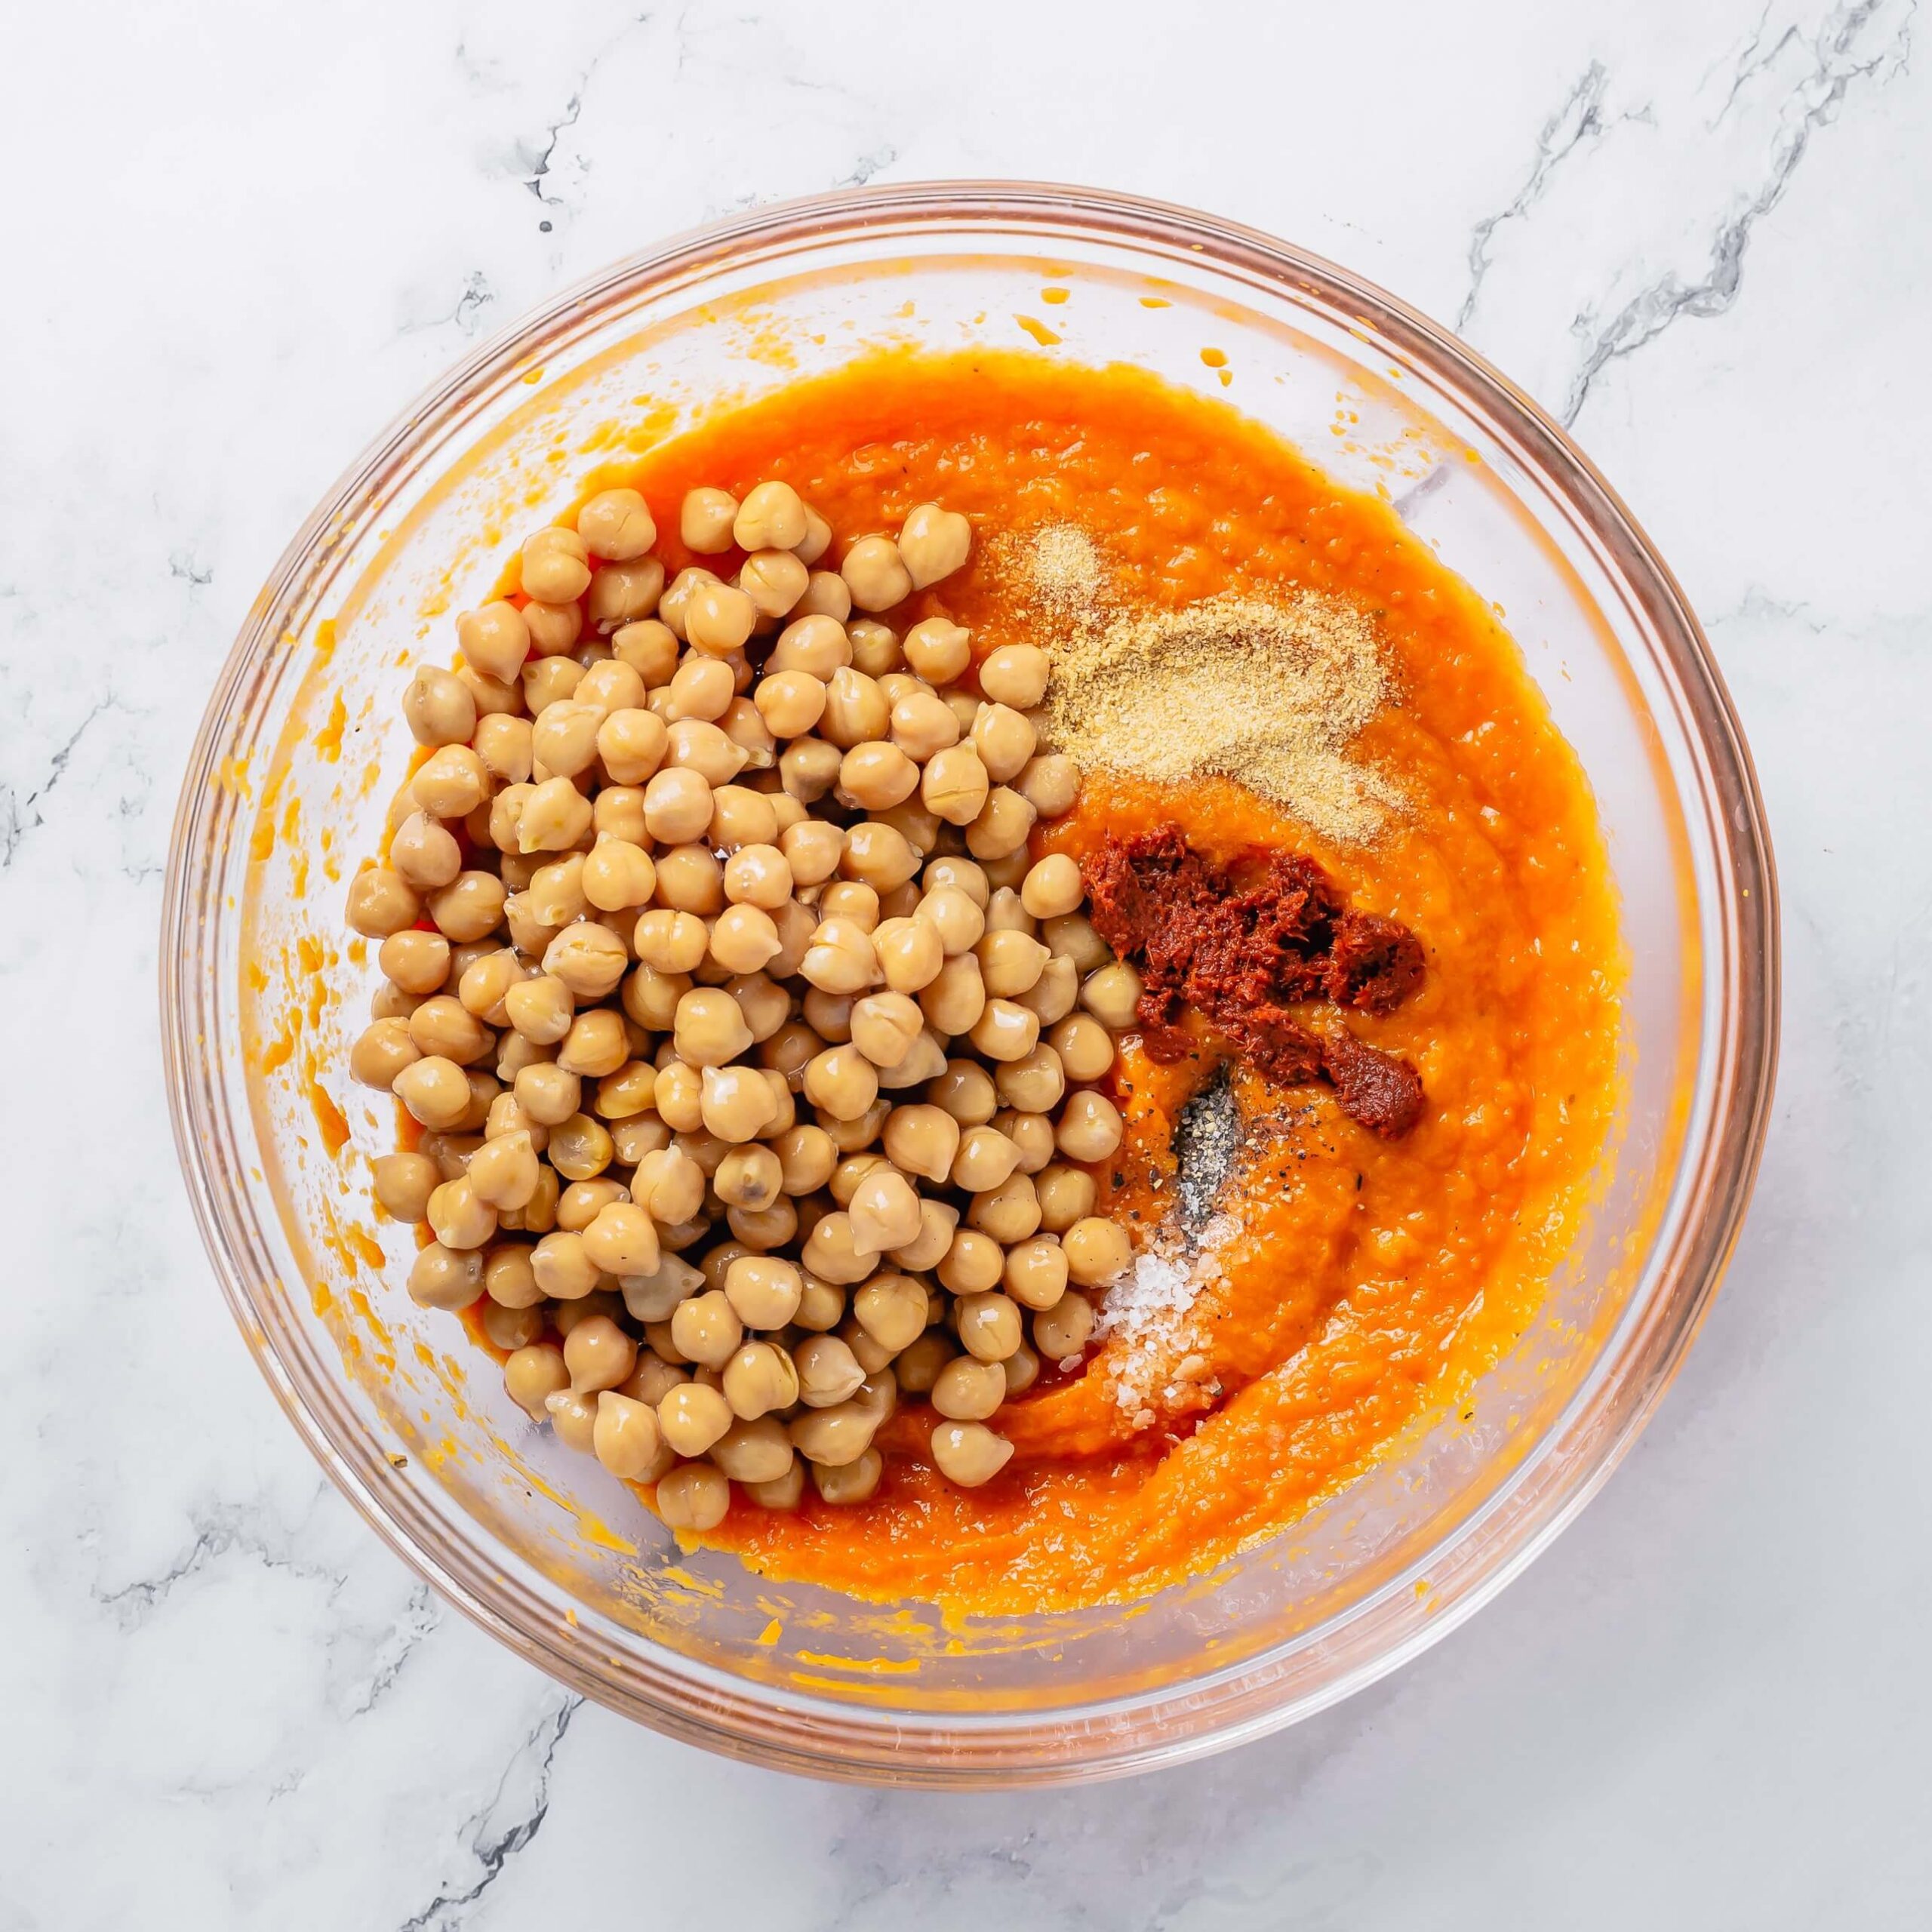 A glass bowl containing the ingredients for pumpkin hummus.